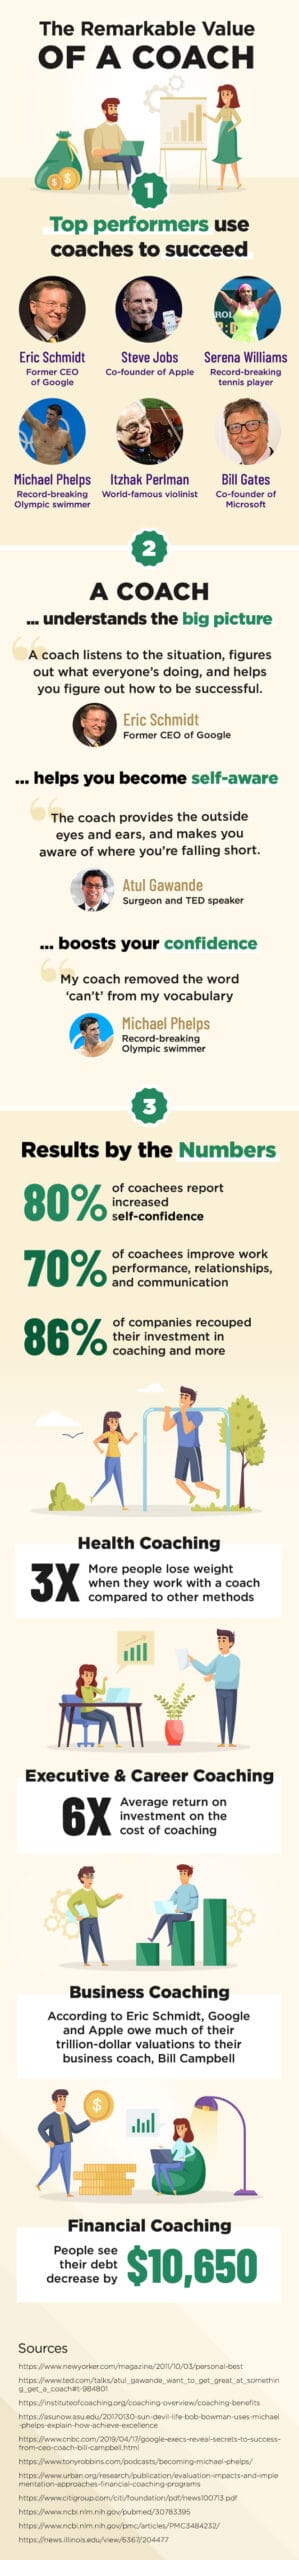 infographic coaching clients zhou scaled